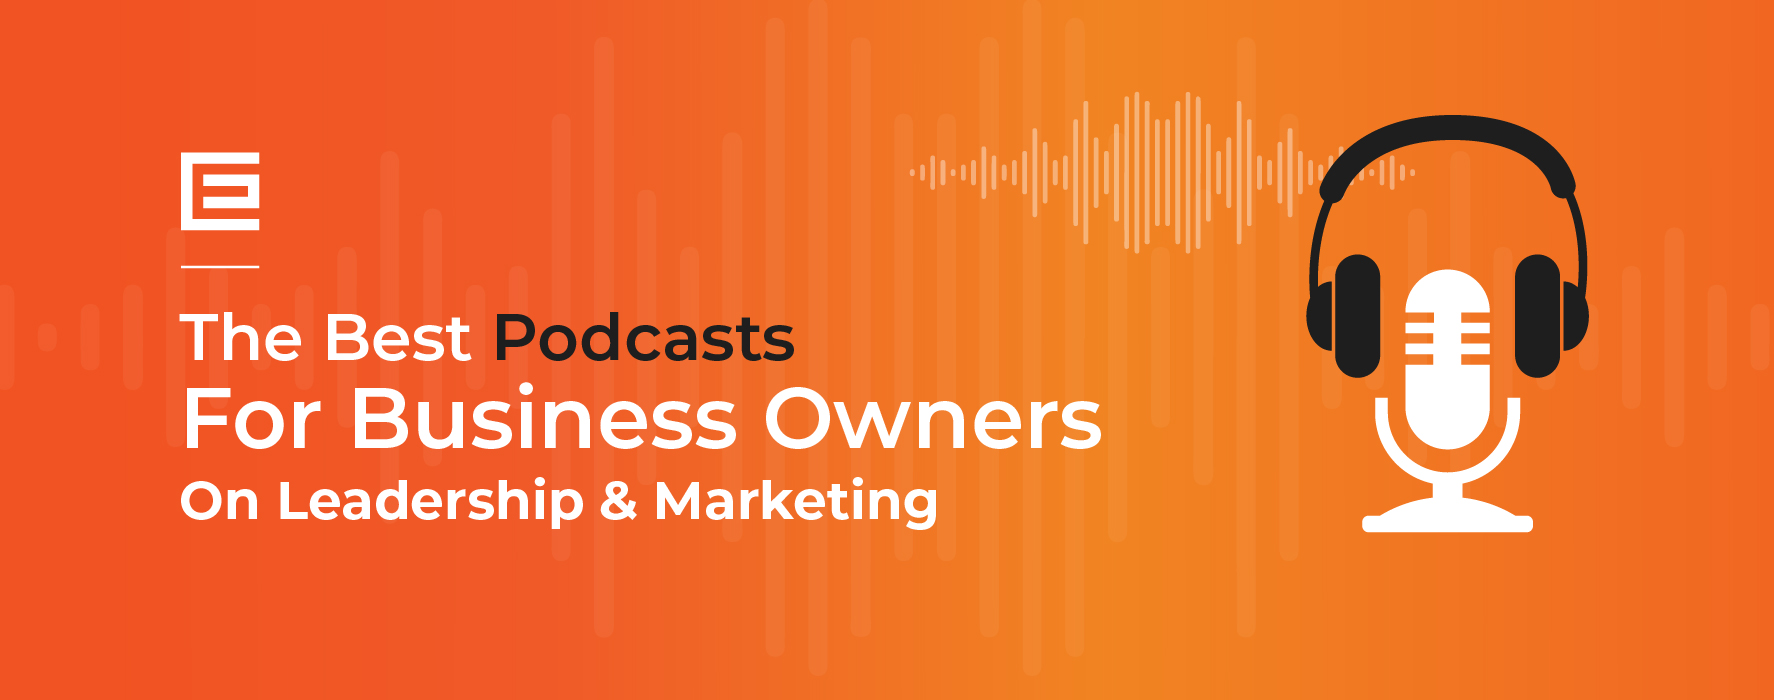 Podcasts for business owners marketers leaders